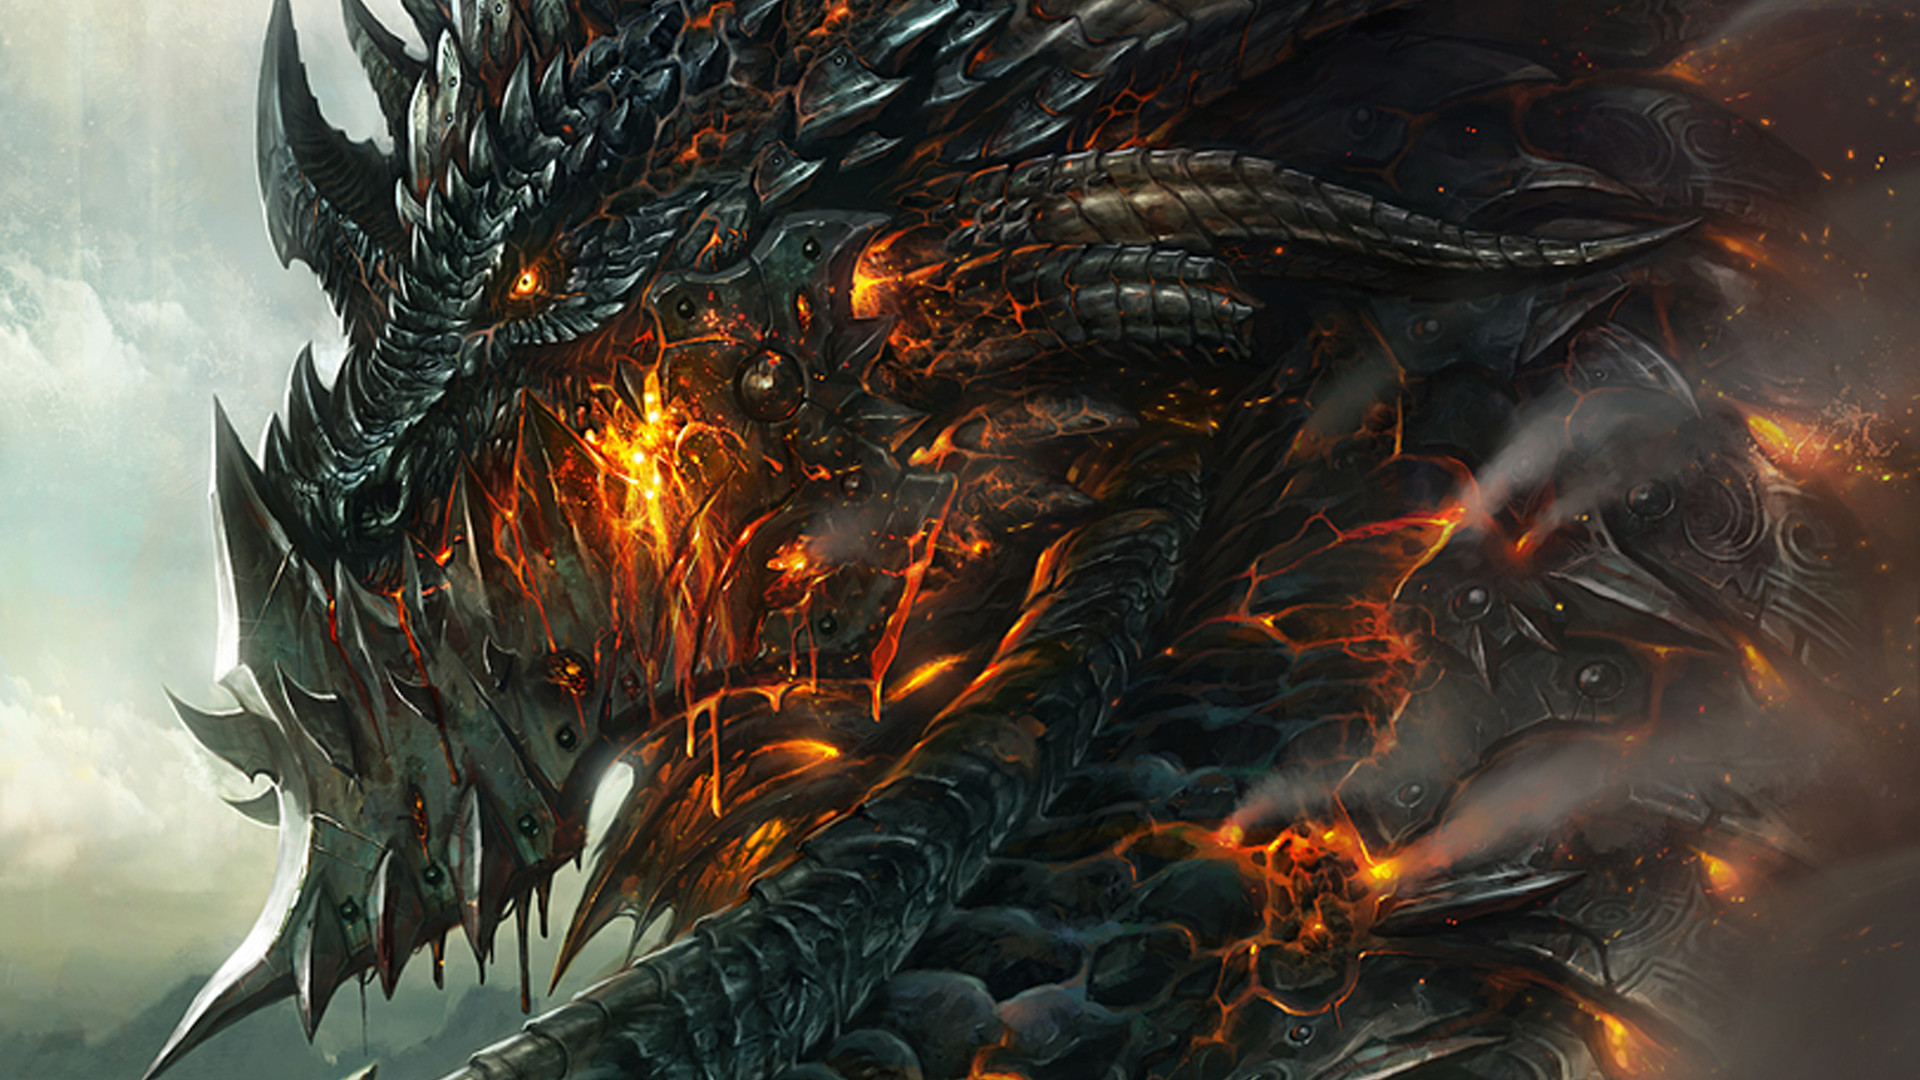 1920x1080 Awesome Dragons wallpaper